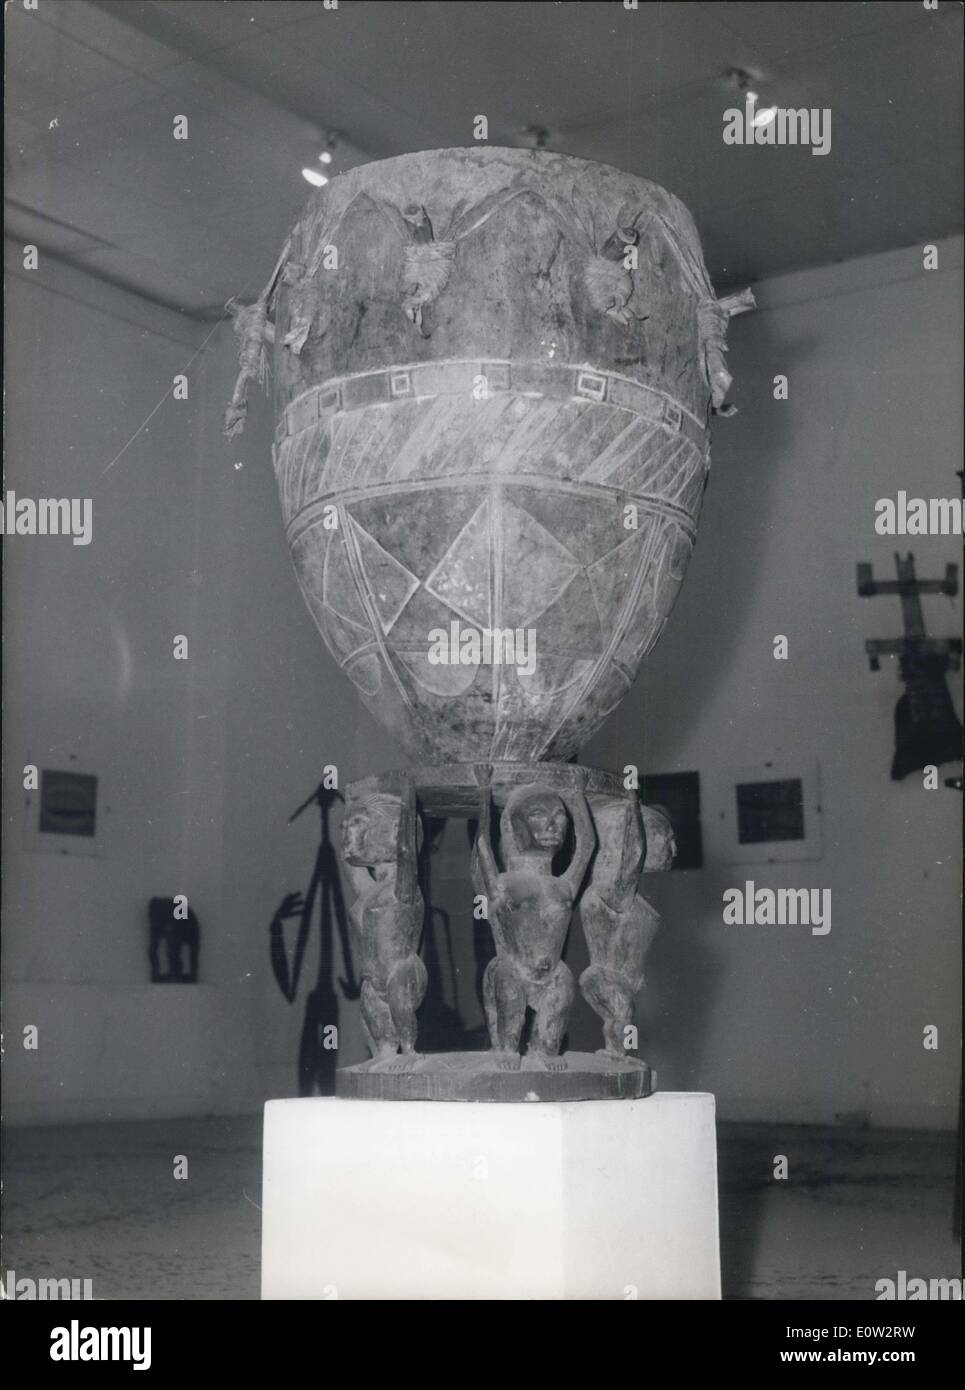 Feb. 06, 1961 - African Art show opens in Paris: An African Art show is now being held at the Museum of Modern Art, Paris. Photo shows Tam Tam Baga one of the exhibits seen at the show. Stock Photo